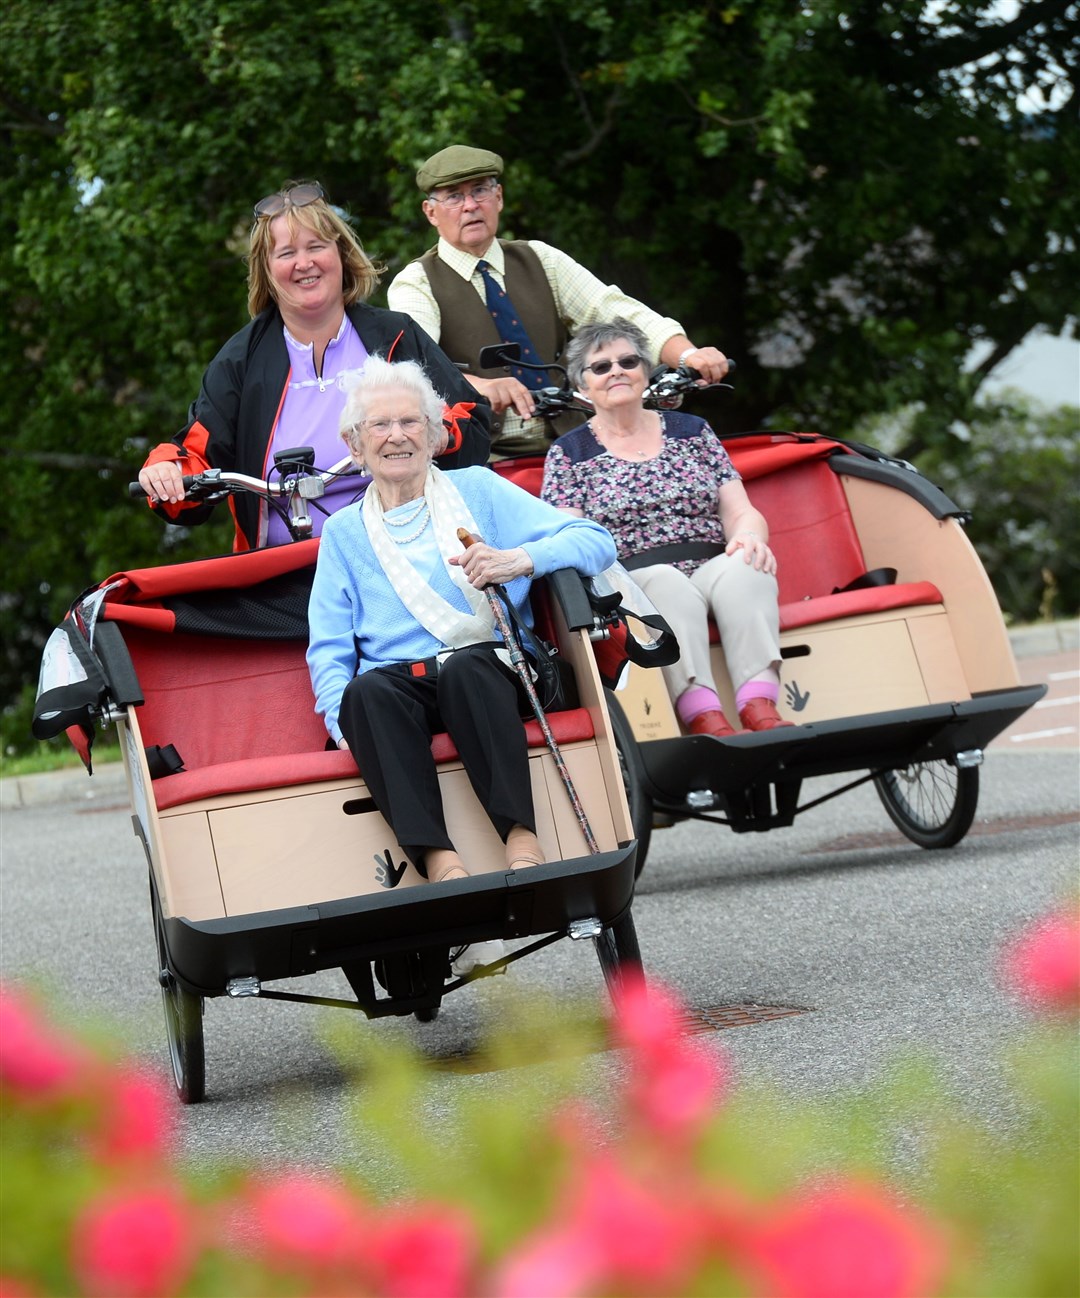 Cycling Without Age's trishaws have been running in Inverness for several years. Picture: Gary Anthony.